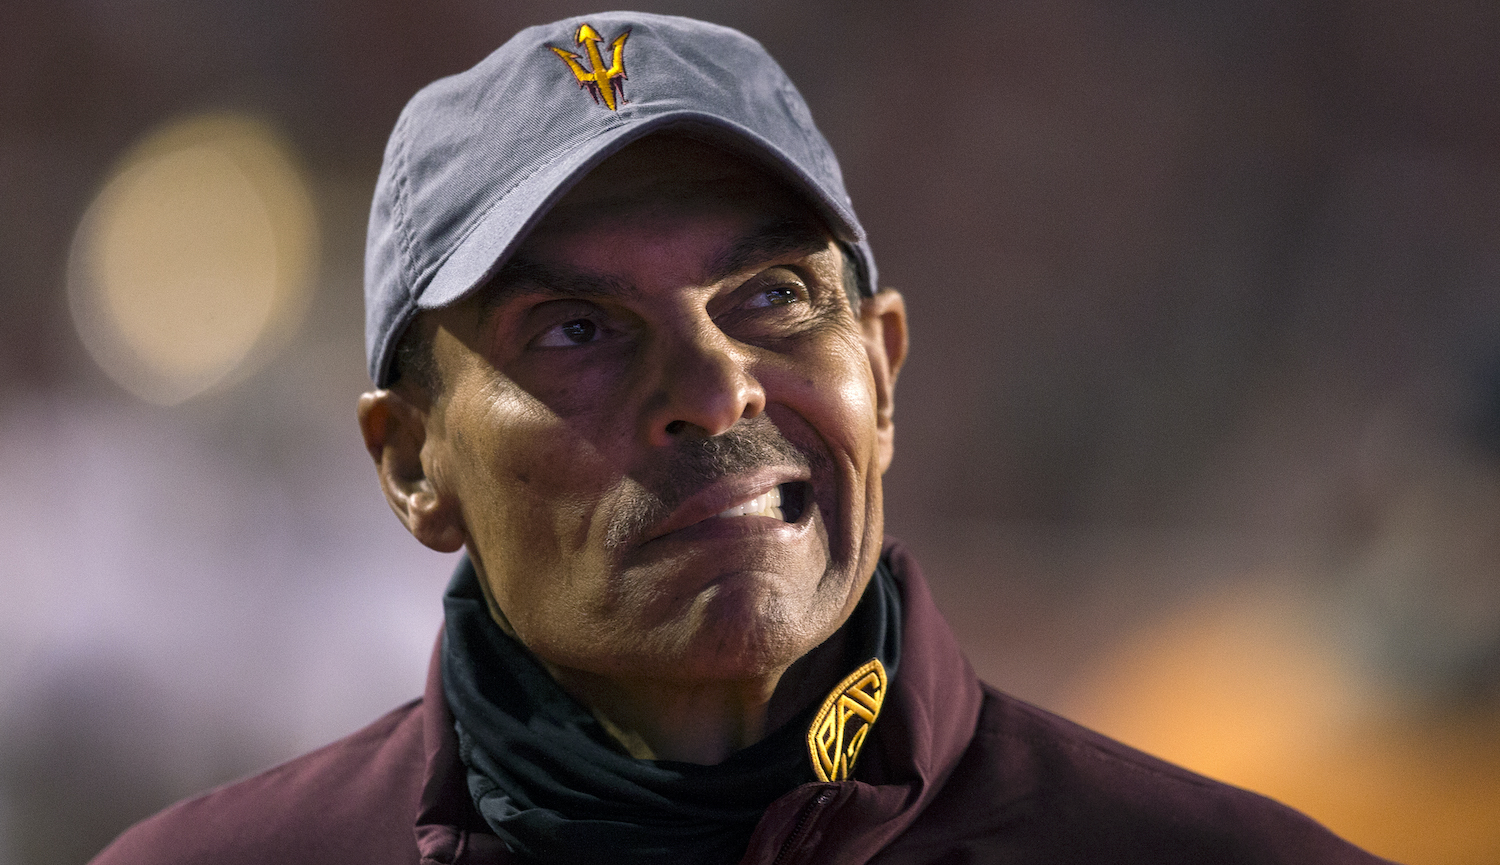 SALT LAKE CITY, UT - OCTOBER 16: Head coach Herm Edwards of the Arizona State Sun Devils reacts after the loss to the Utah Utes at Rice-Eccles Stadium on October 16, 2021 in Salt Lake City, Utah. (Photo by Chris Gardner/Getty Images)